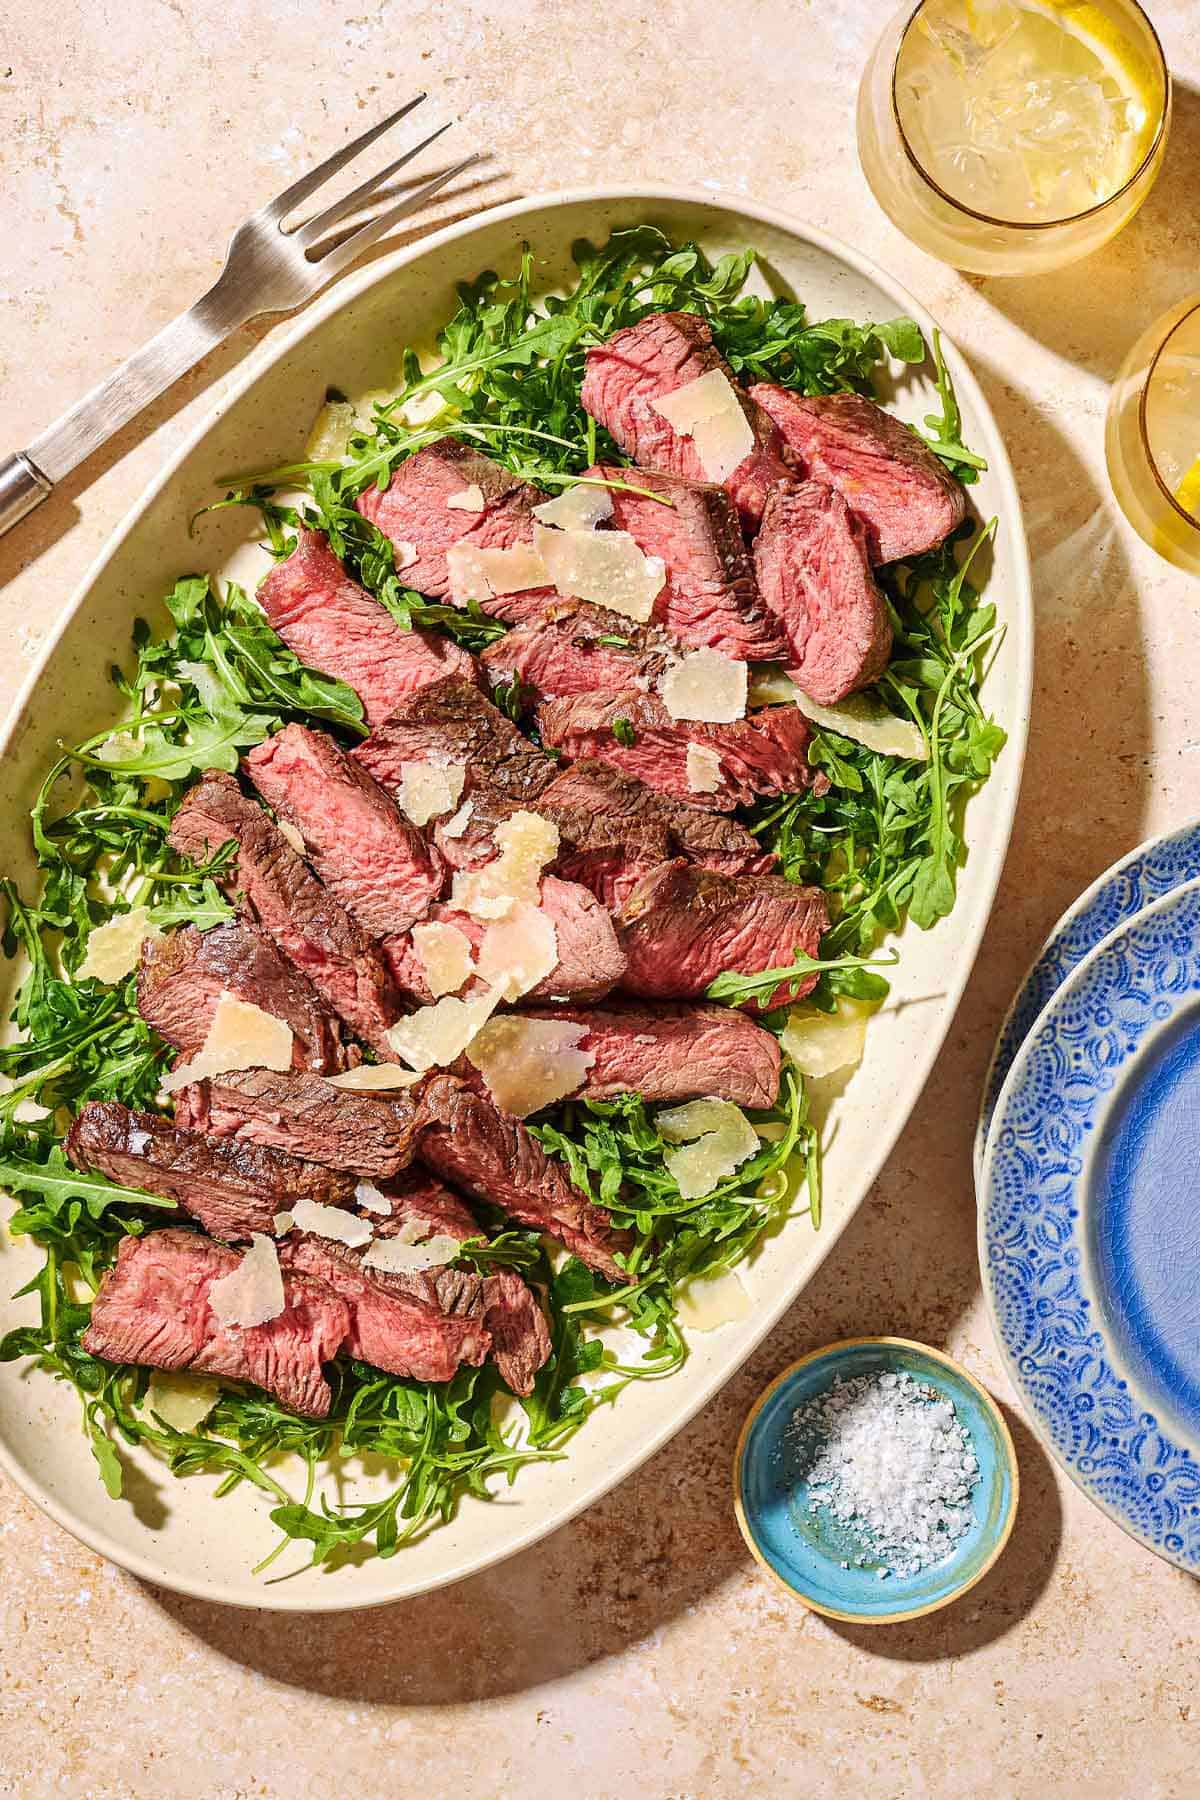 An overhead photo of beef tagliata topped with shaved parmesan on a bed of arugula on a serving platter. Next to this is a small bowl of salt, two glasses of water, a stack of 2 plates, and a serving fork.